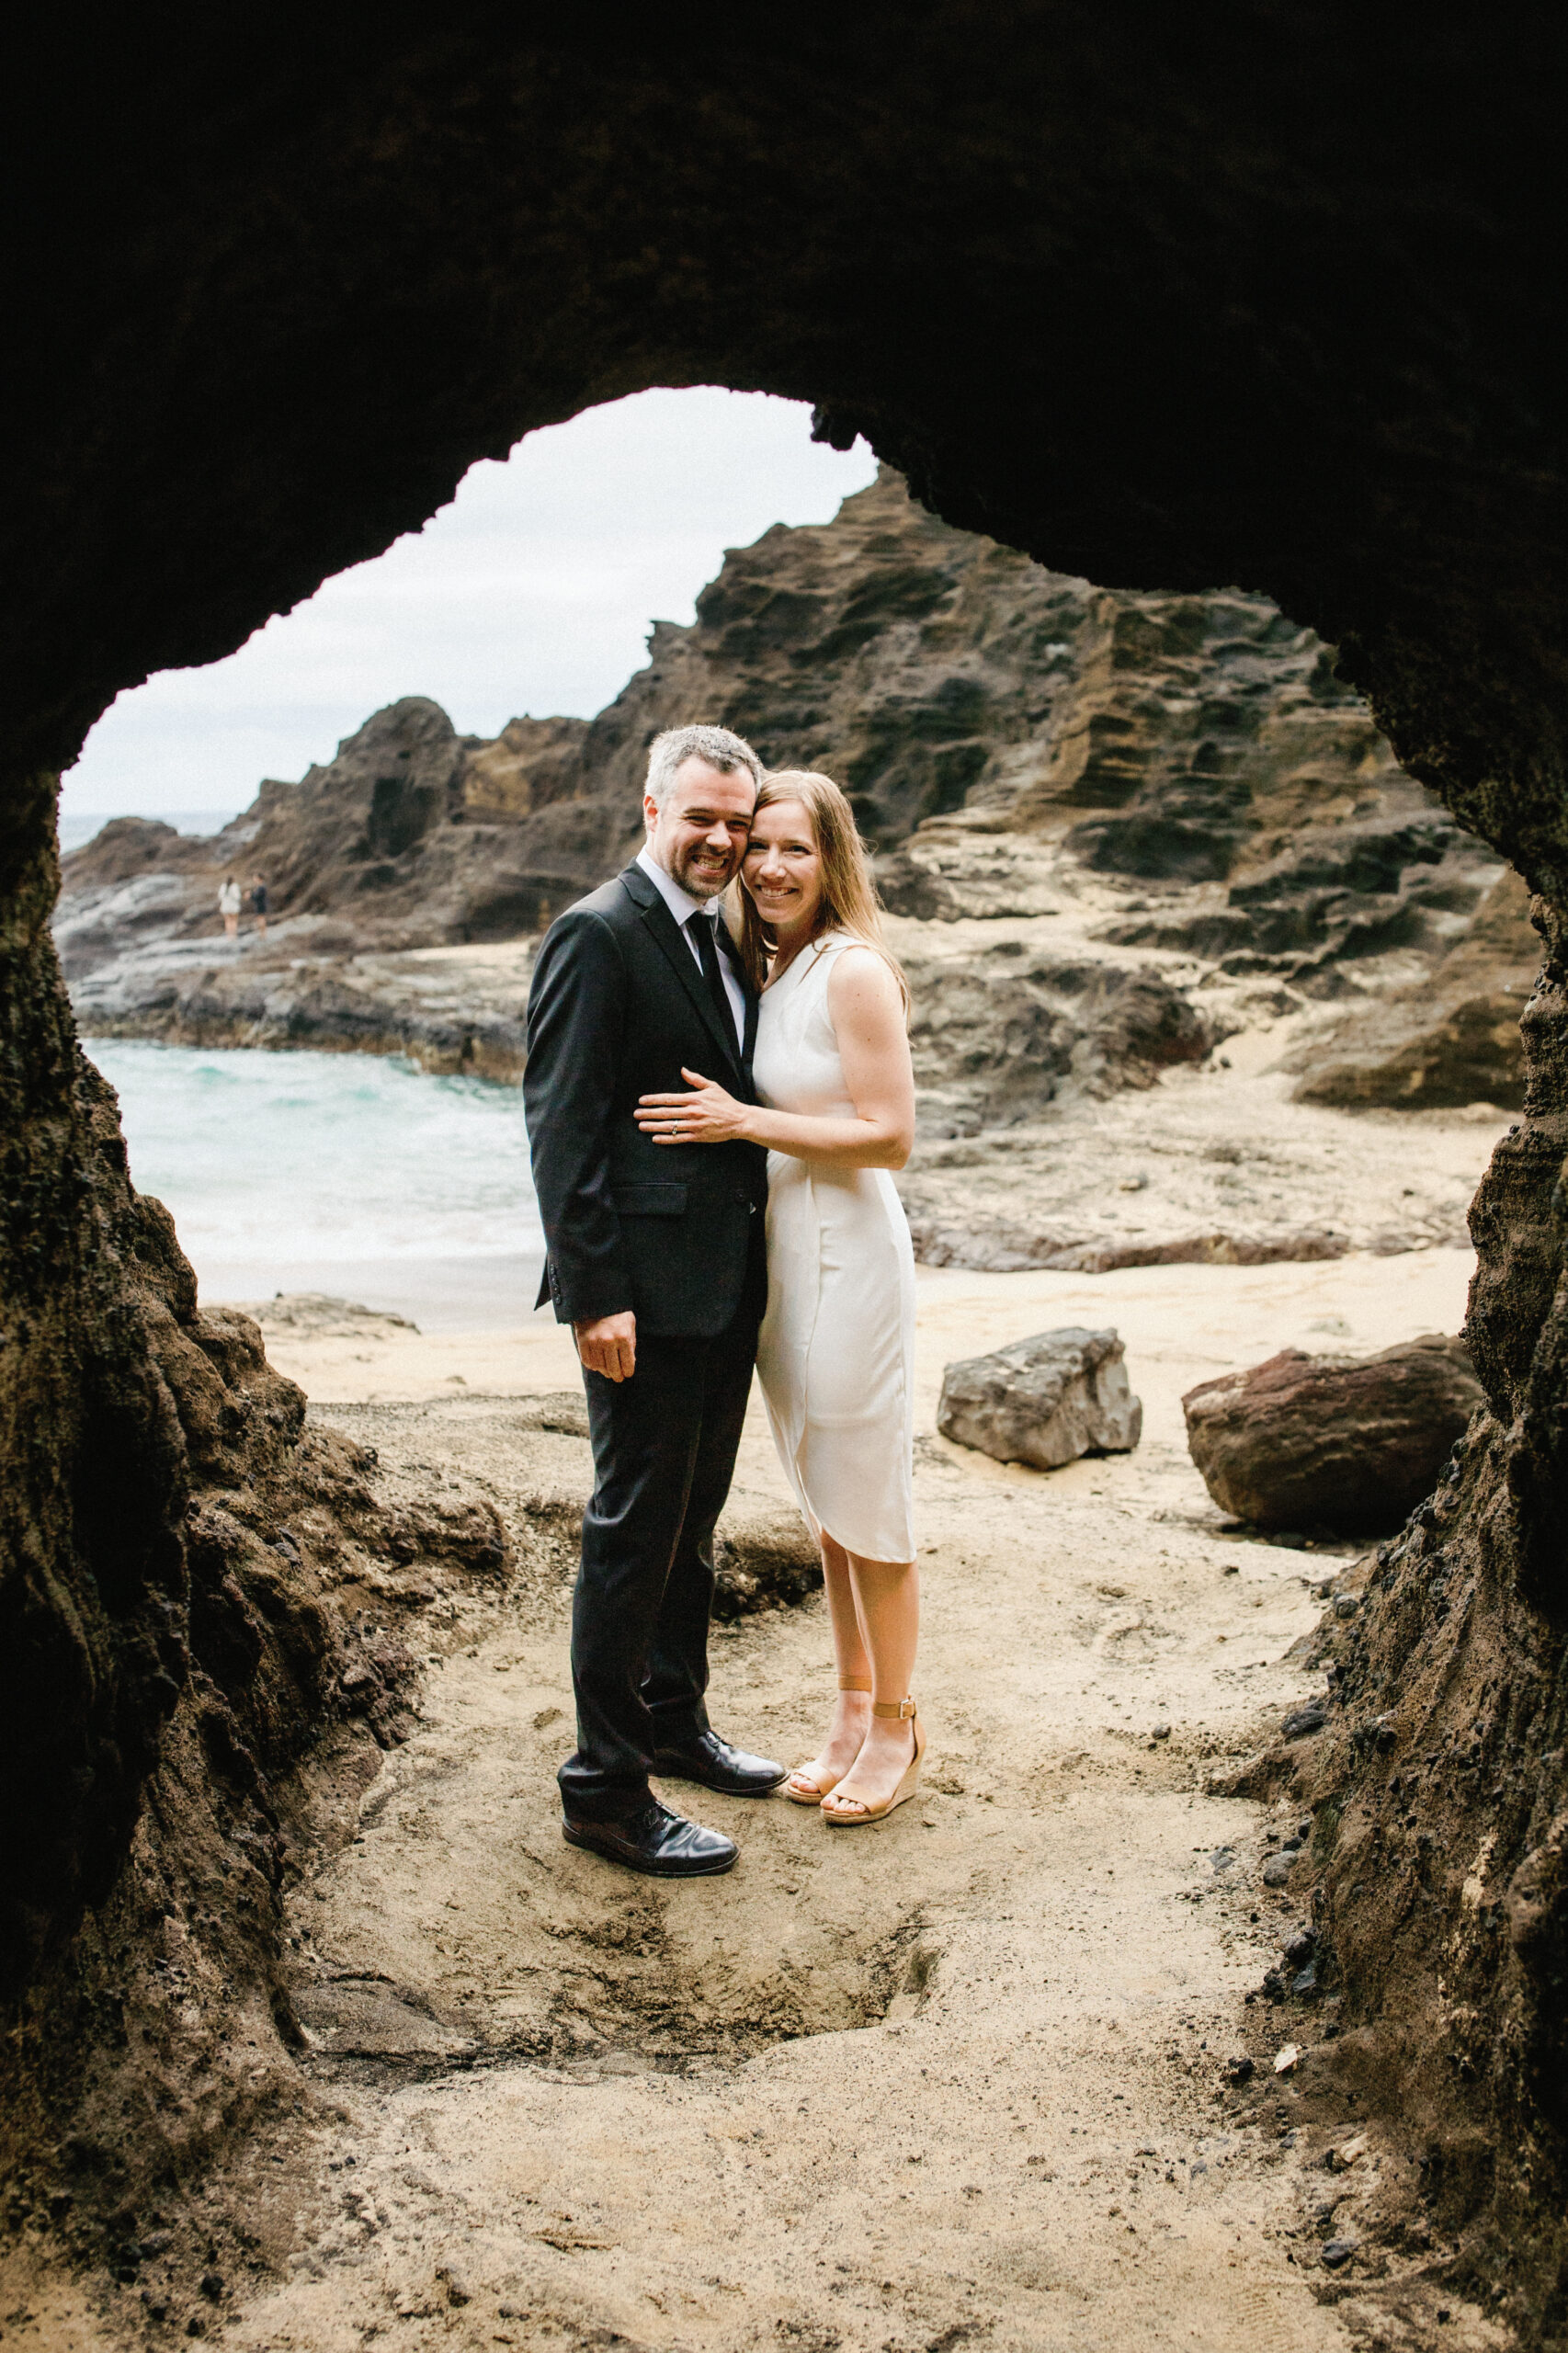 oahu beach brandon and vao couples photography annie groves 14 scaled